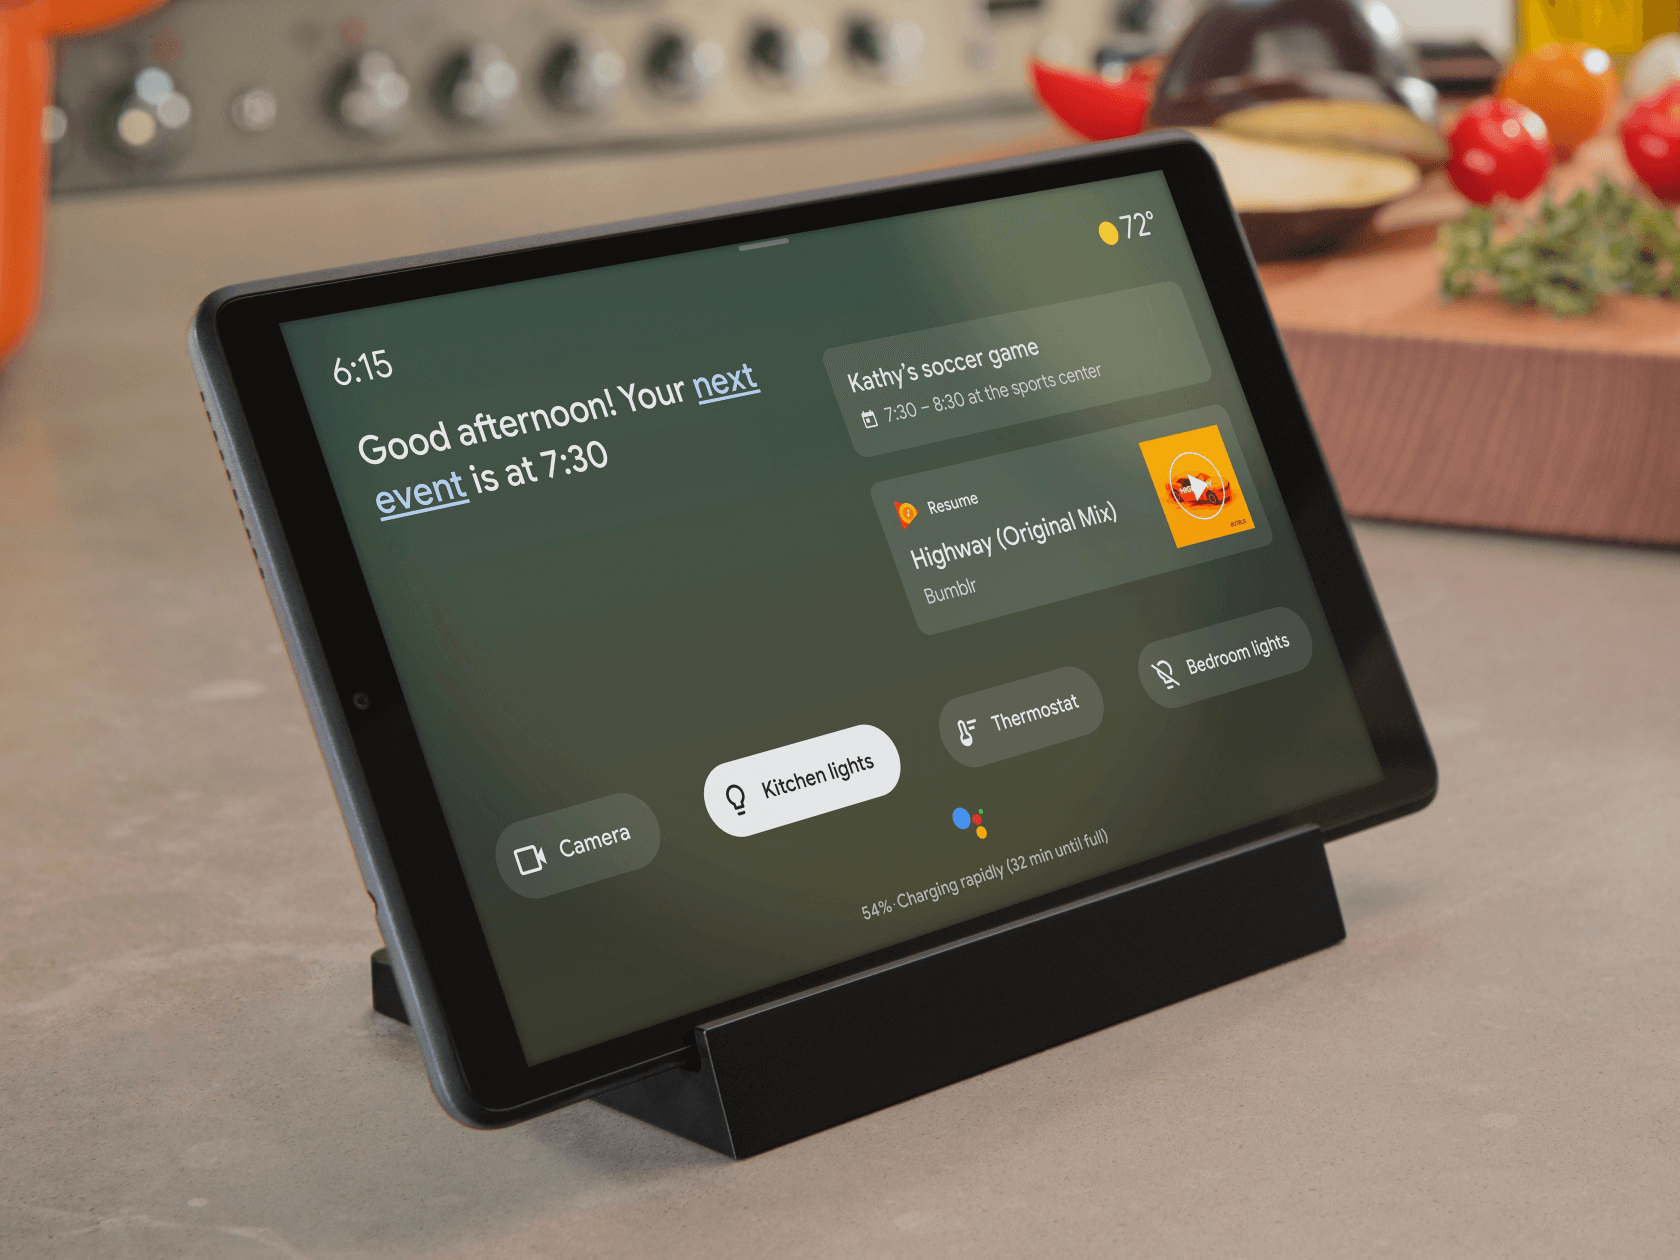 Google's 'Ambient Mode' will let you turn select Android devices into smart displays